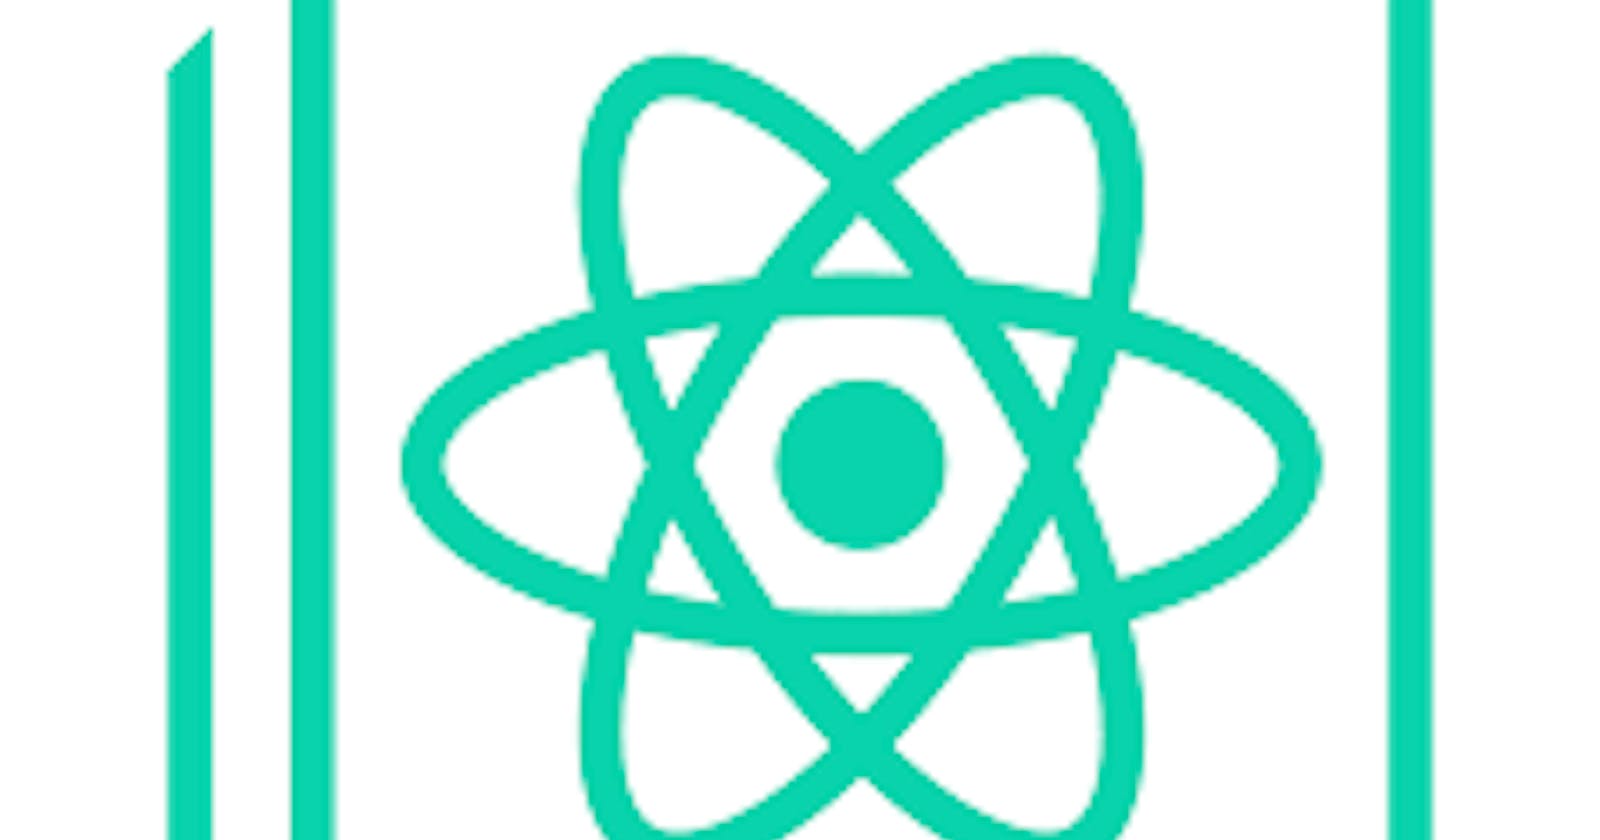 Scripts you can use in Create-React-App